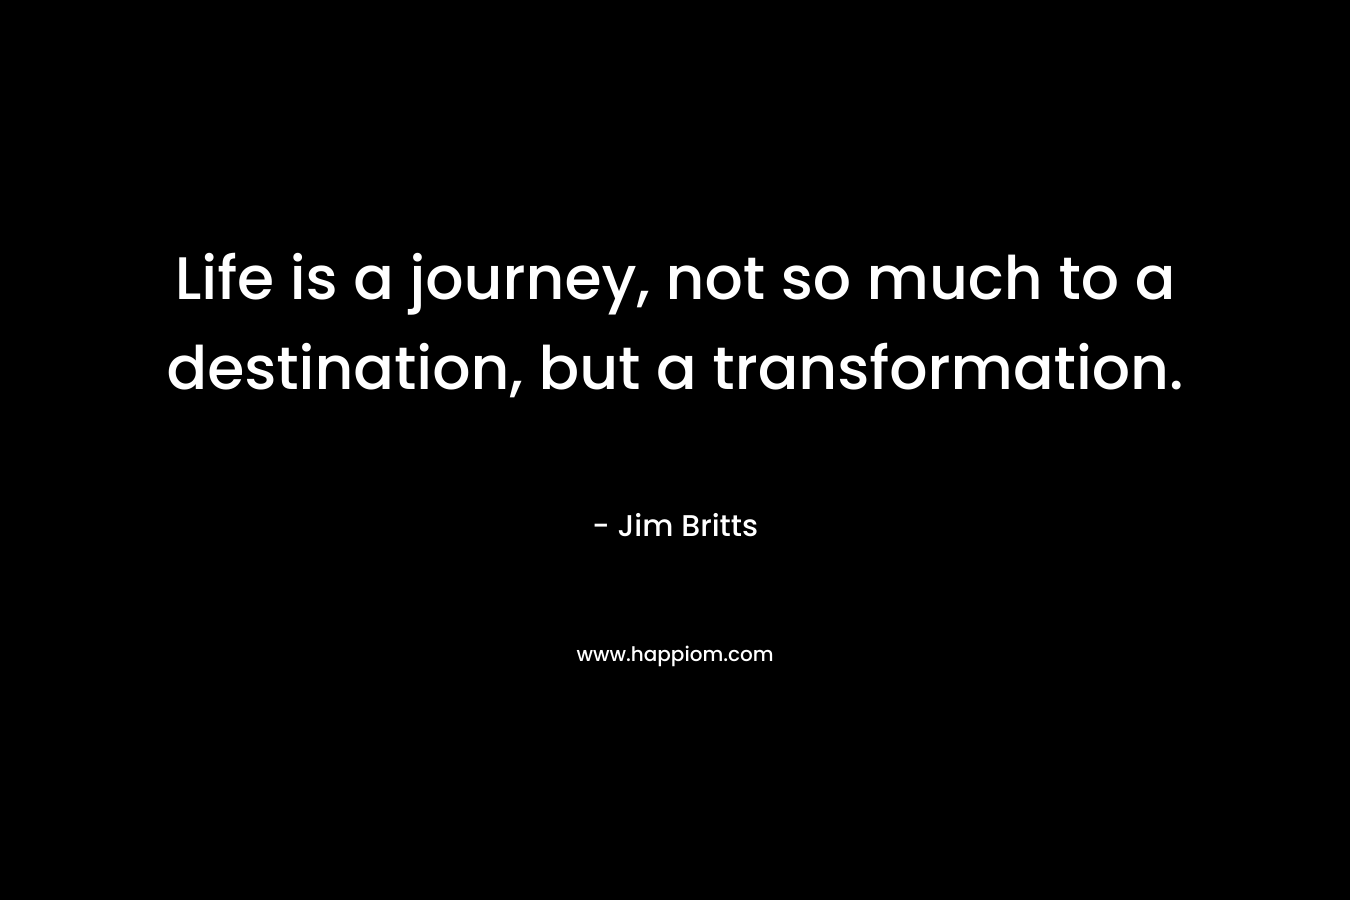 Life is a journey, not so much to a destination, but a transformation.